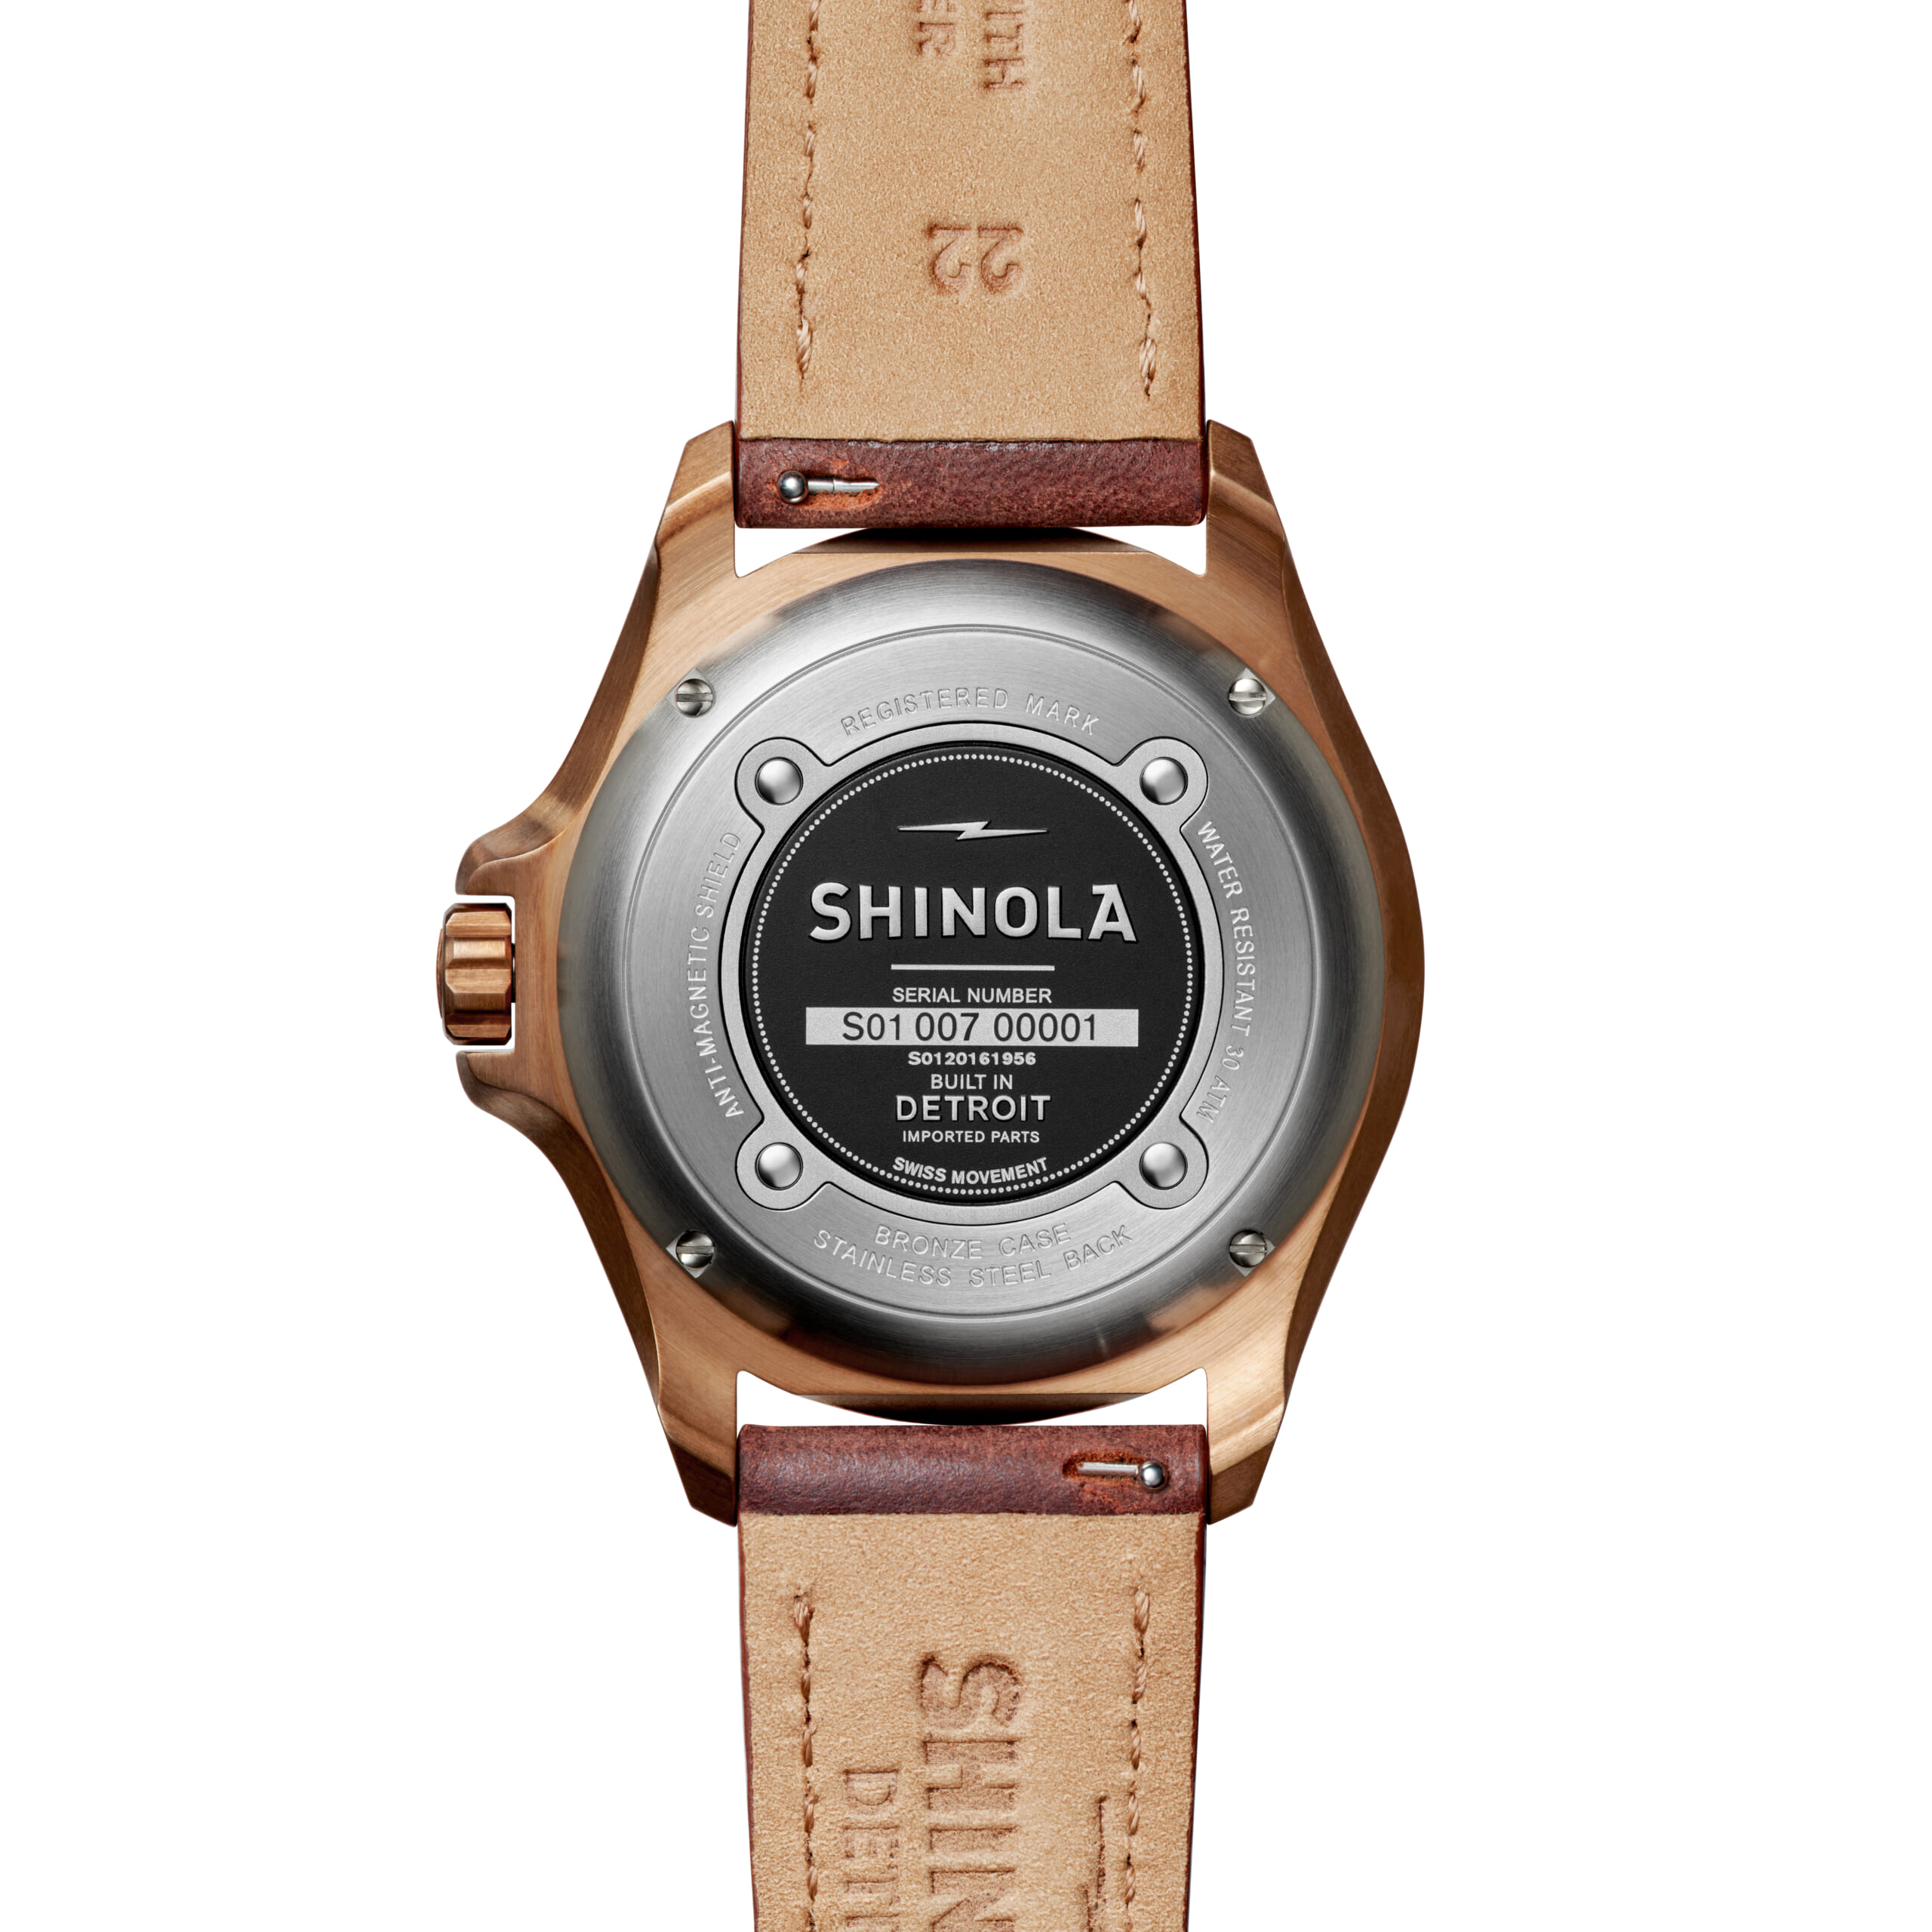 Shinola S Bronze Monster Dive Watch Is Inspired By Prohibition Era